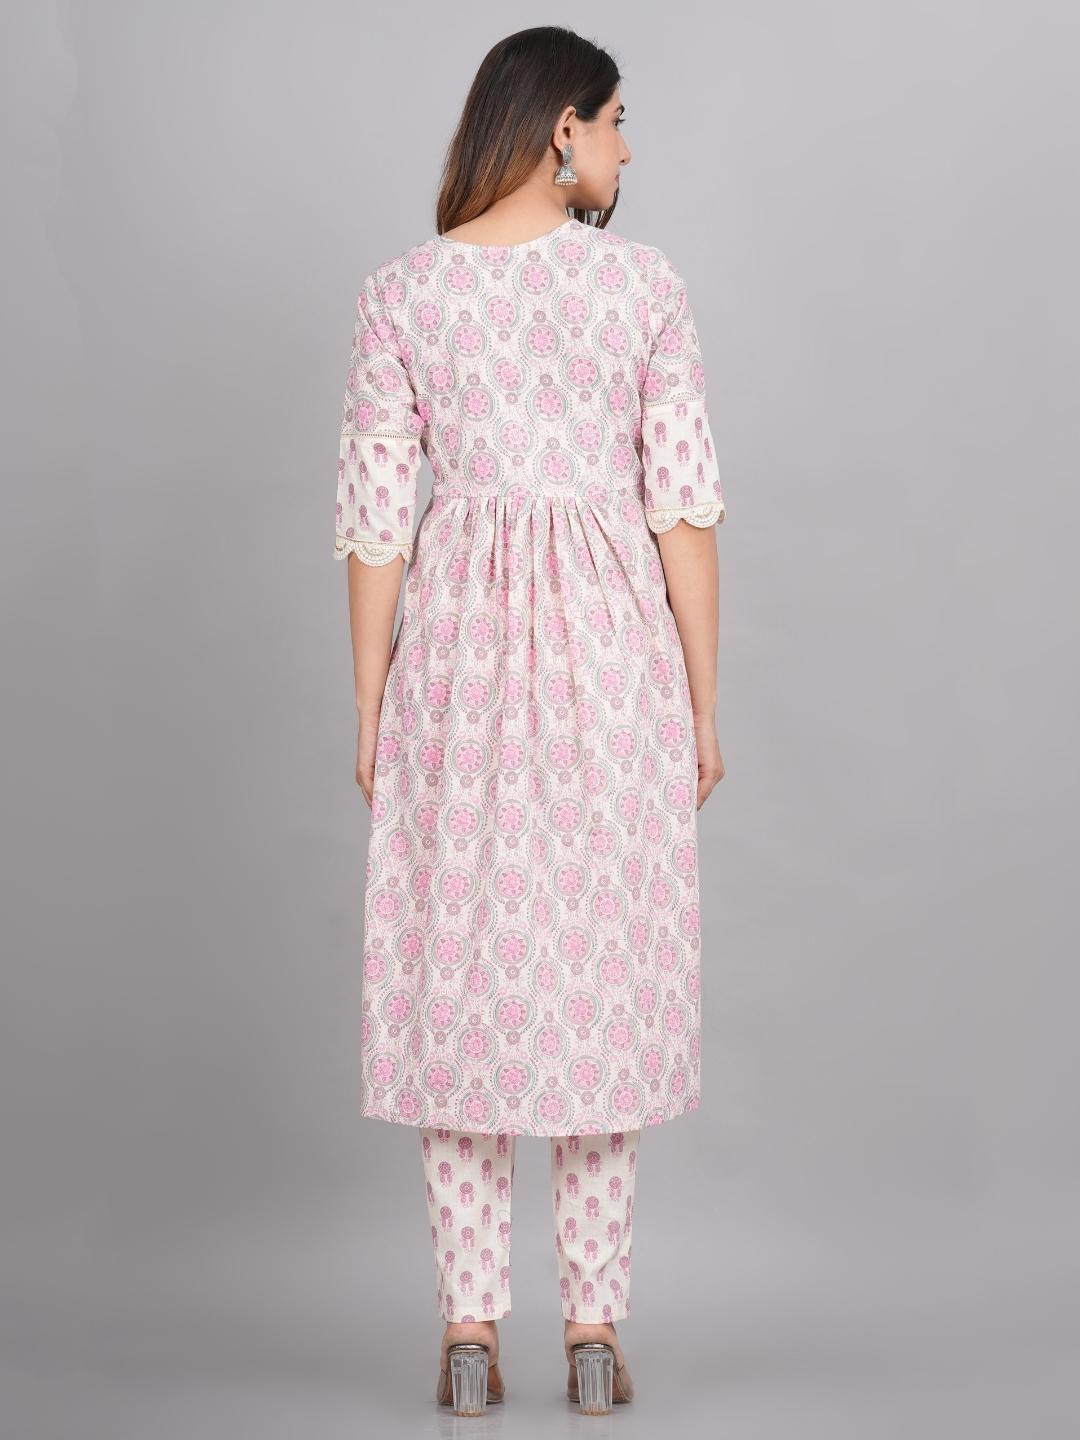 LIVING ROOTS Block Printed Pink Pure Cotton 3 Piece Suit (W-1PC-004-M)